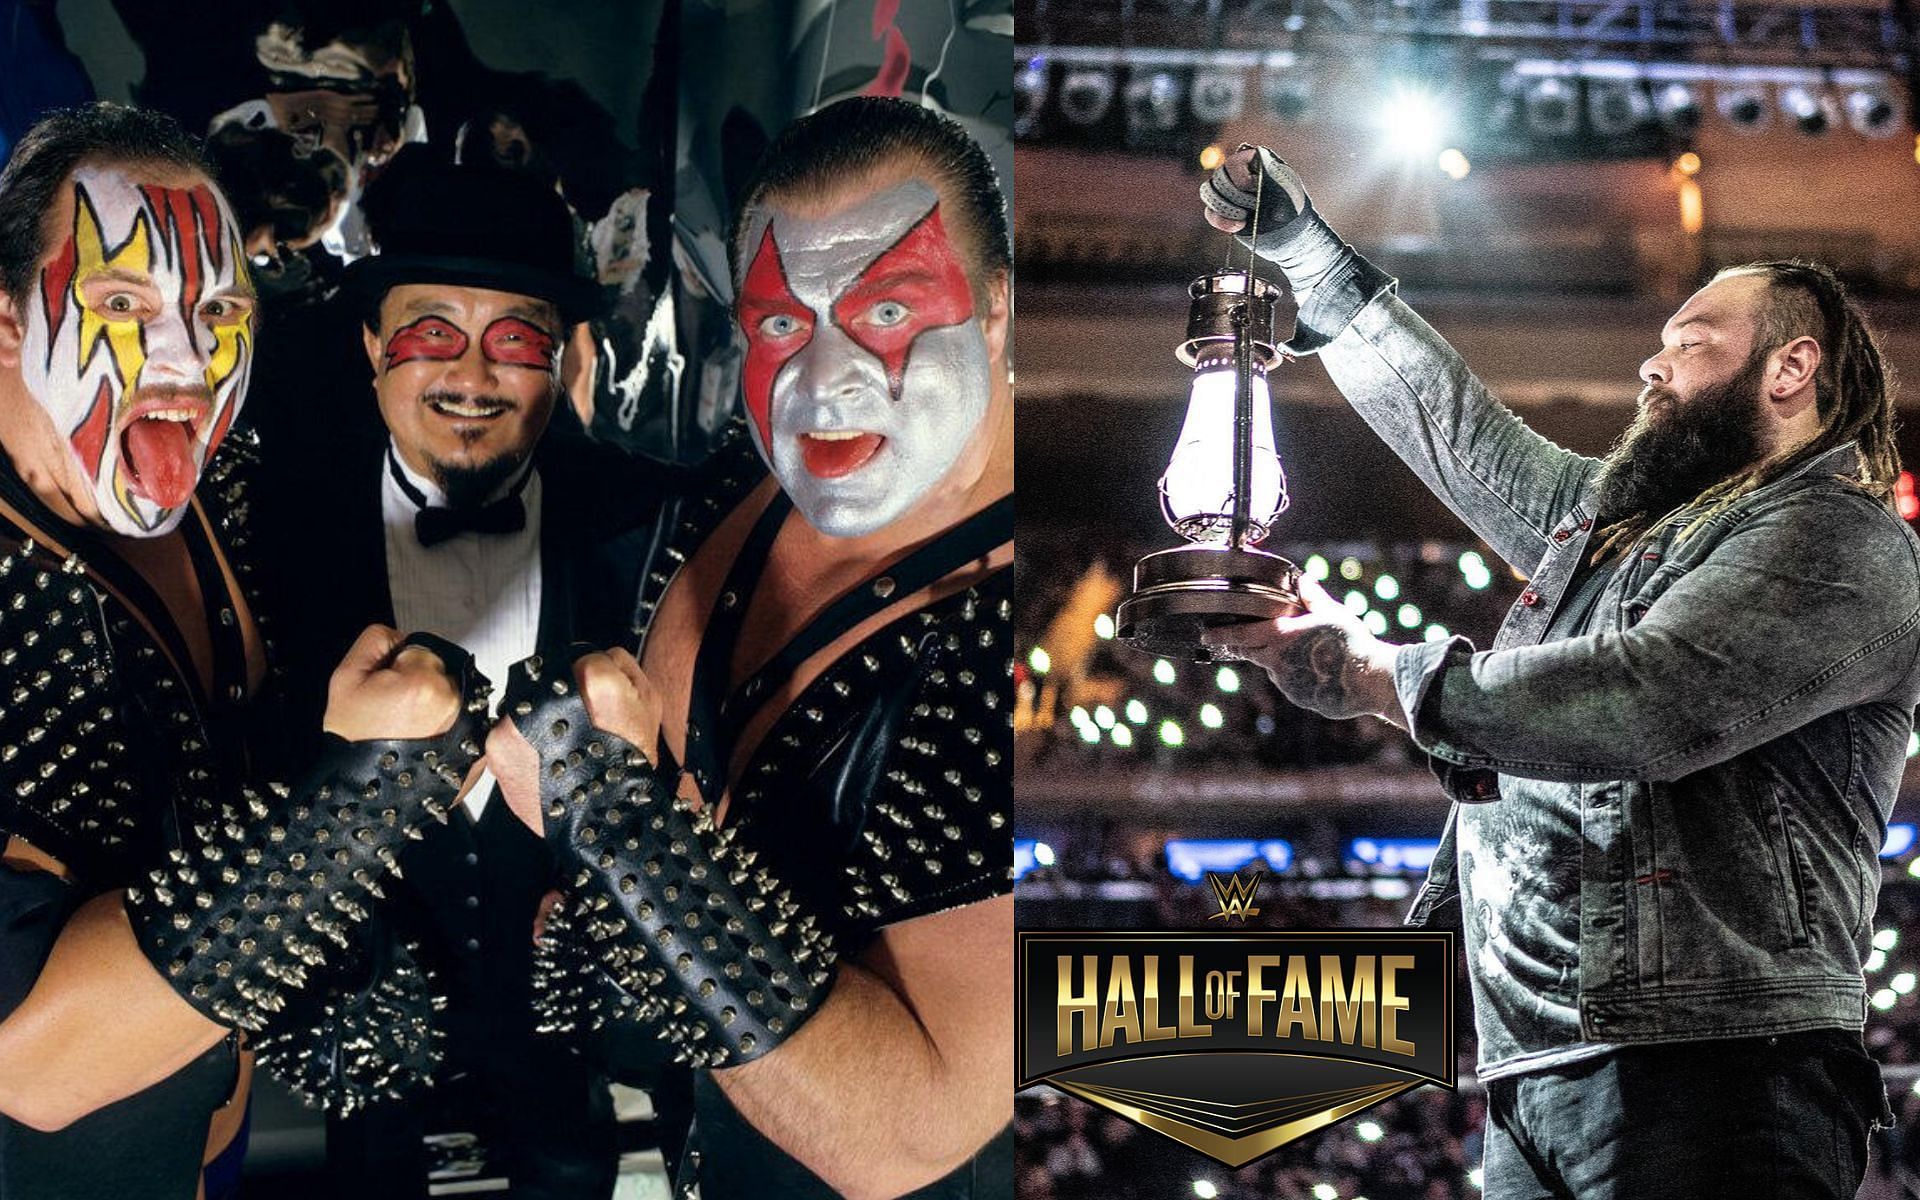 Demolition and Bray Wyatt are both worthy of being inducted into the WWE Hall of Fame.